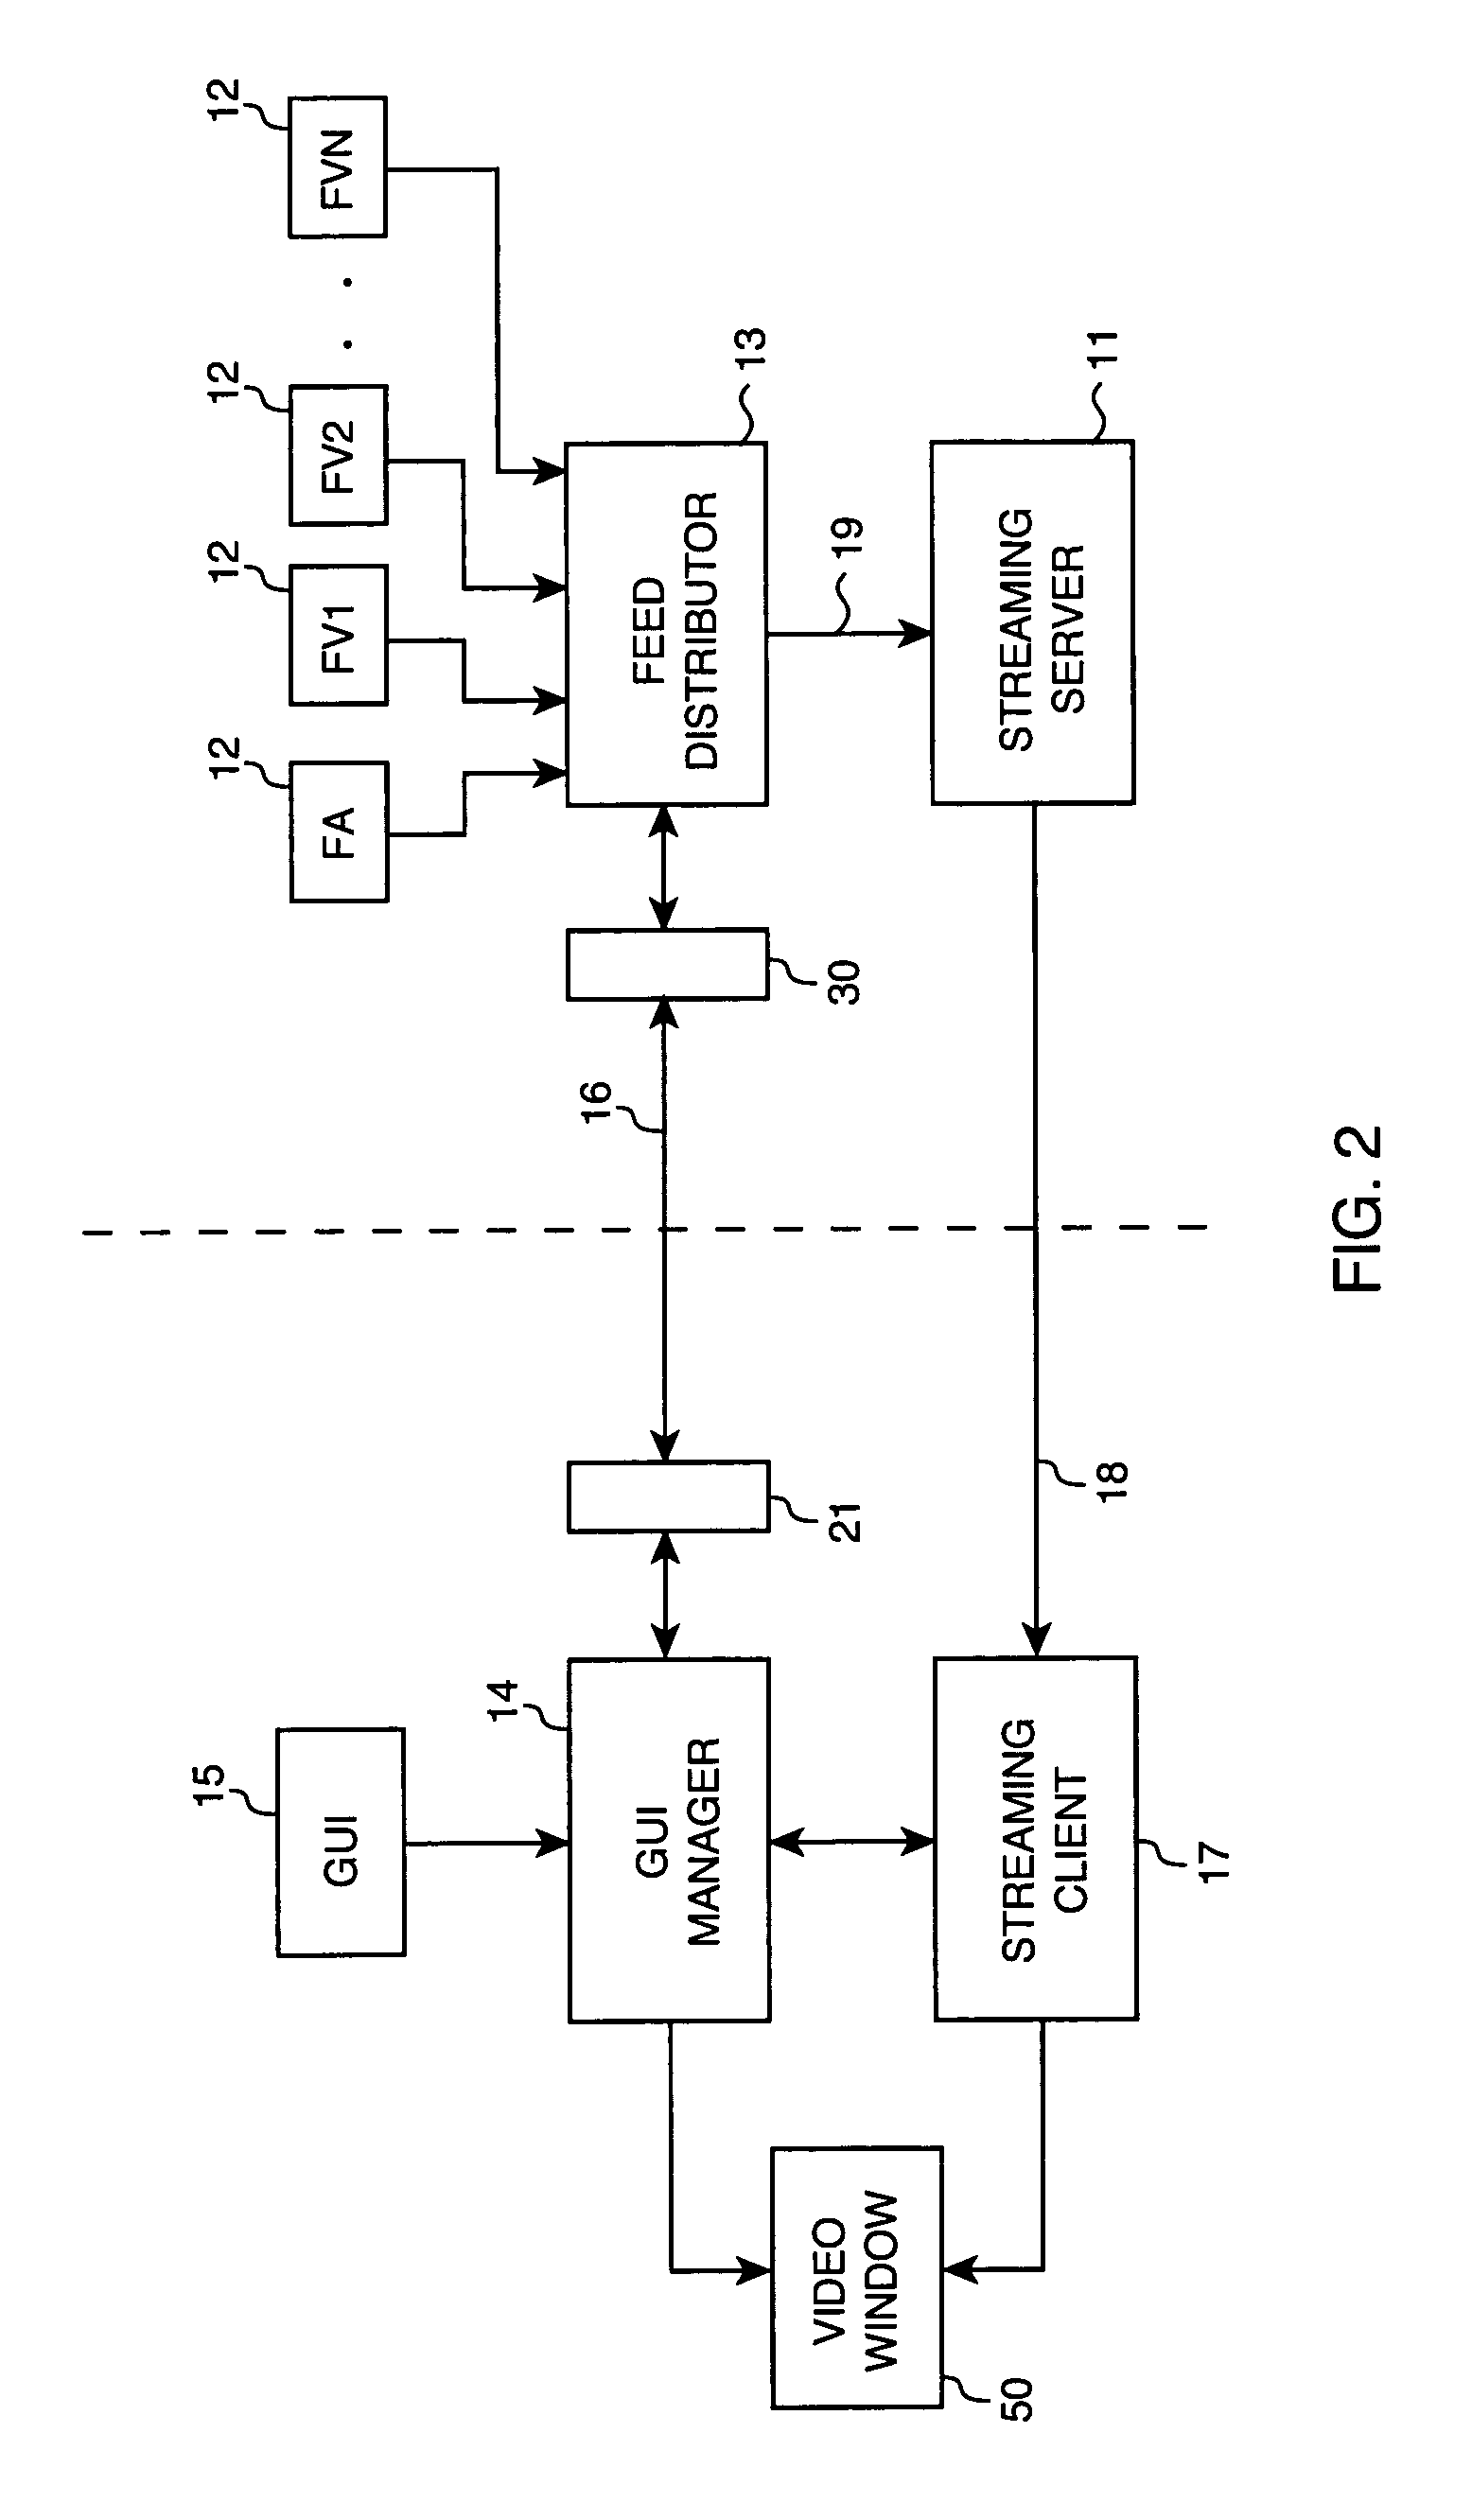 Audio-video data switching and viewing system